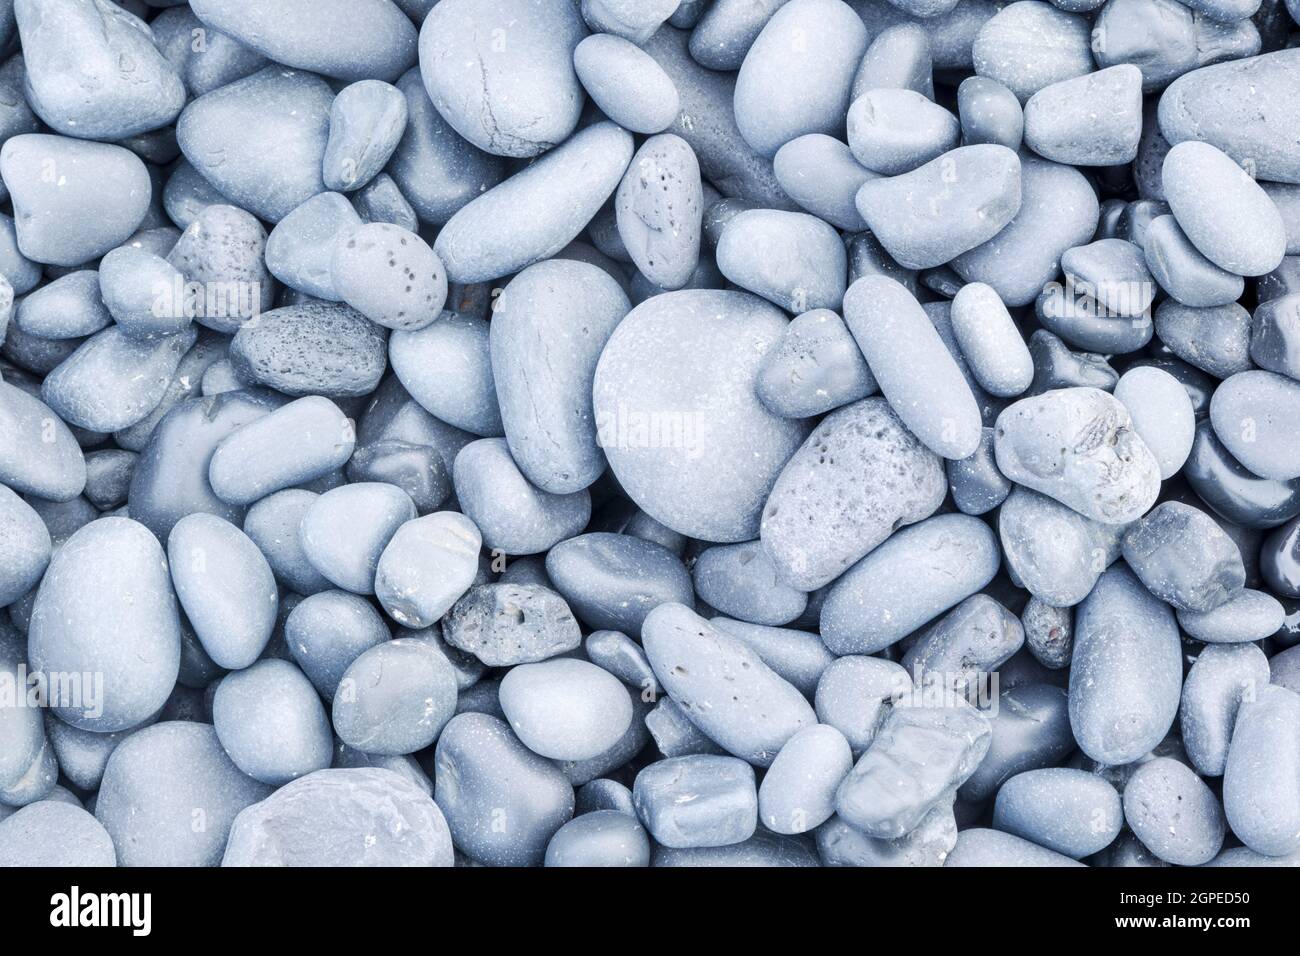 Pale grey beach stones worn smooth by the sea Stock Photo